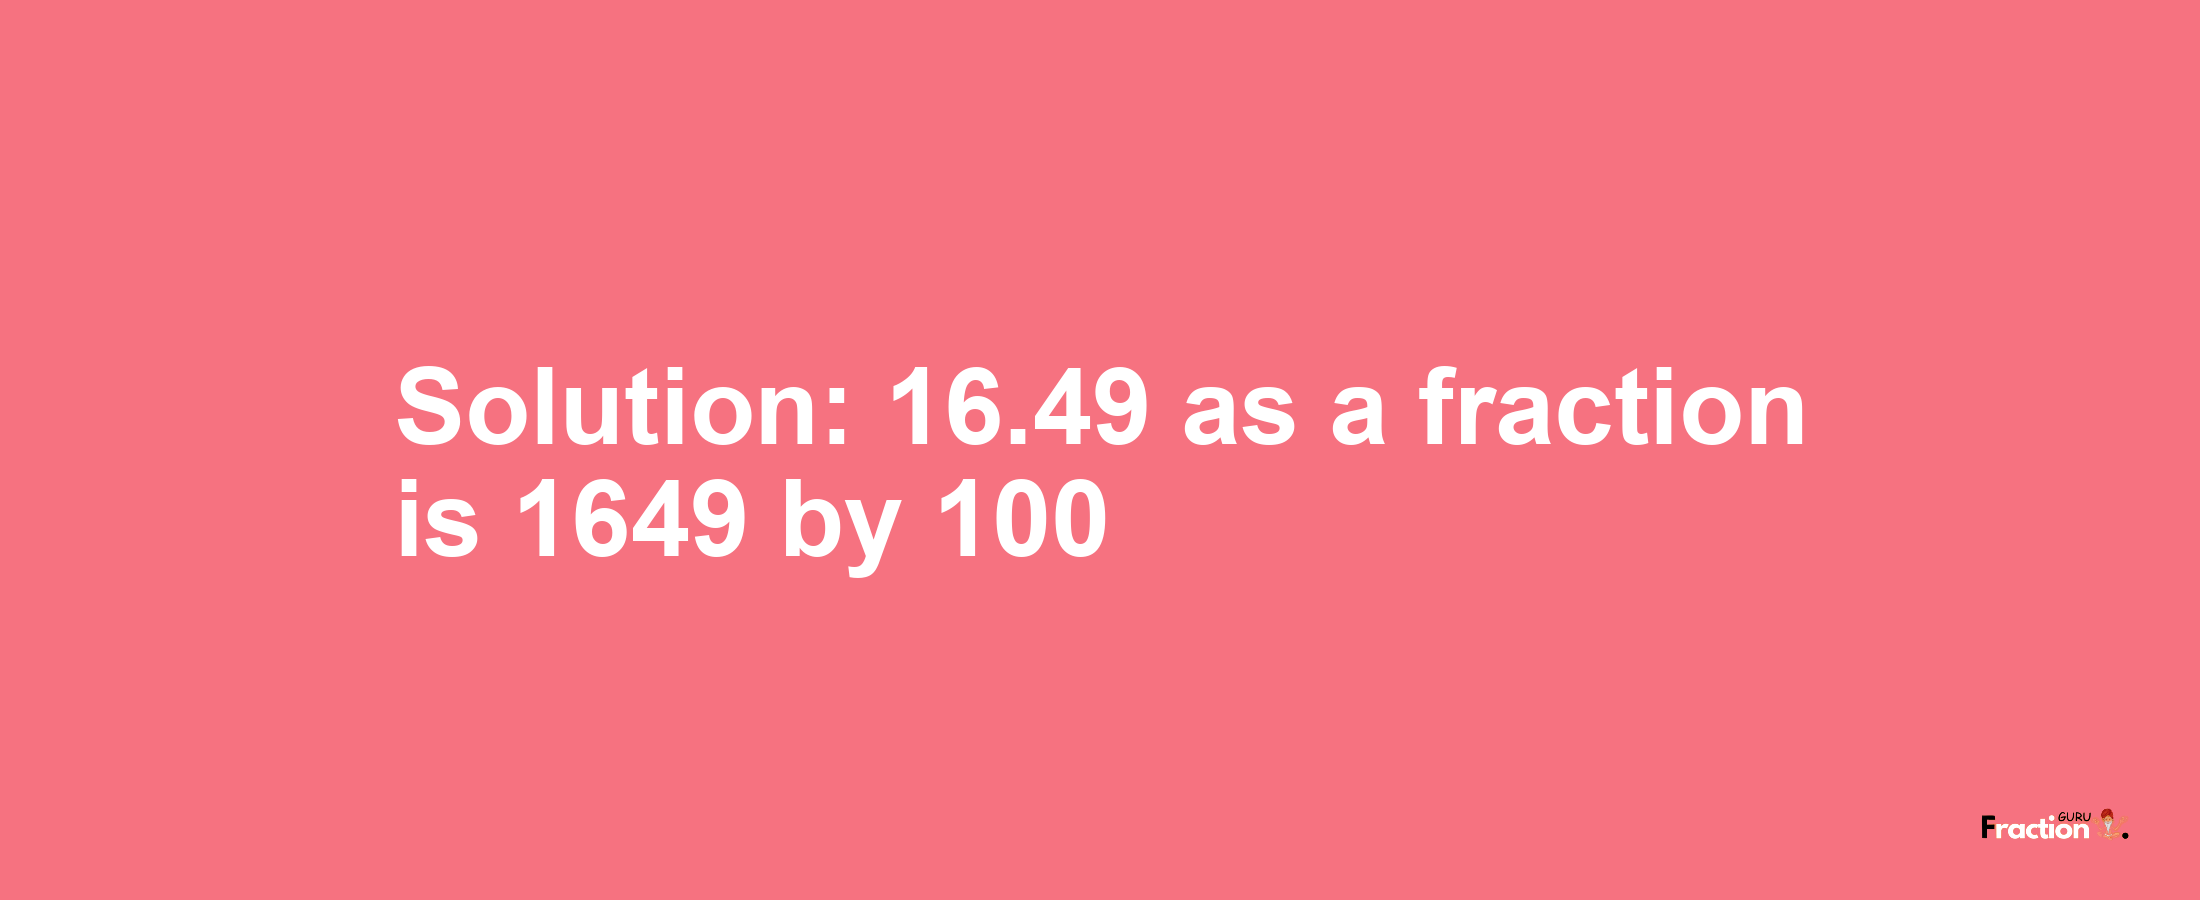 Solution:16.49 as a fraction is 1649/100